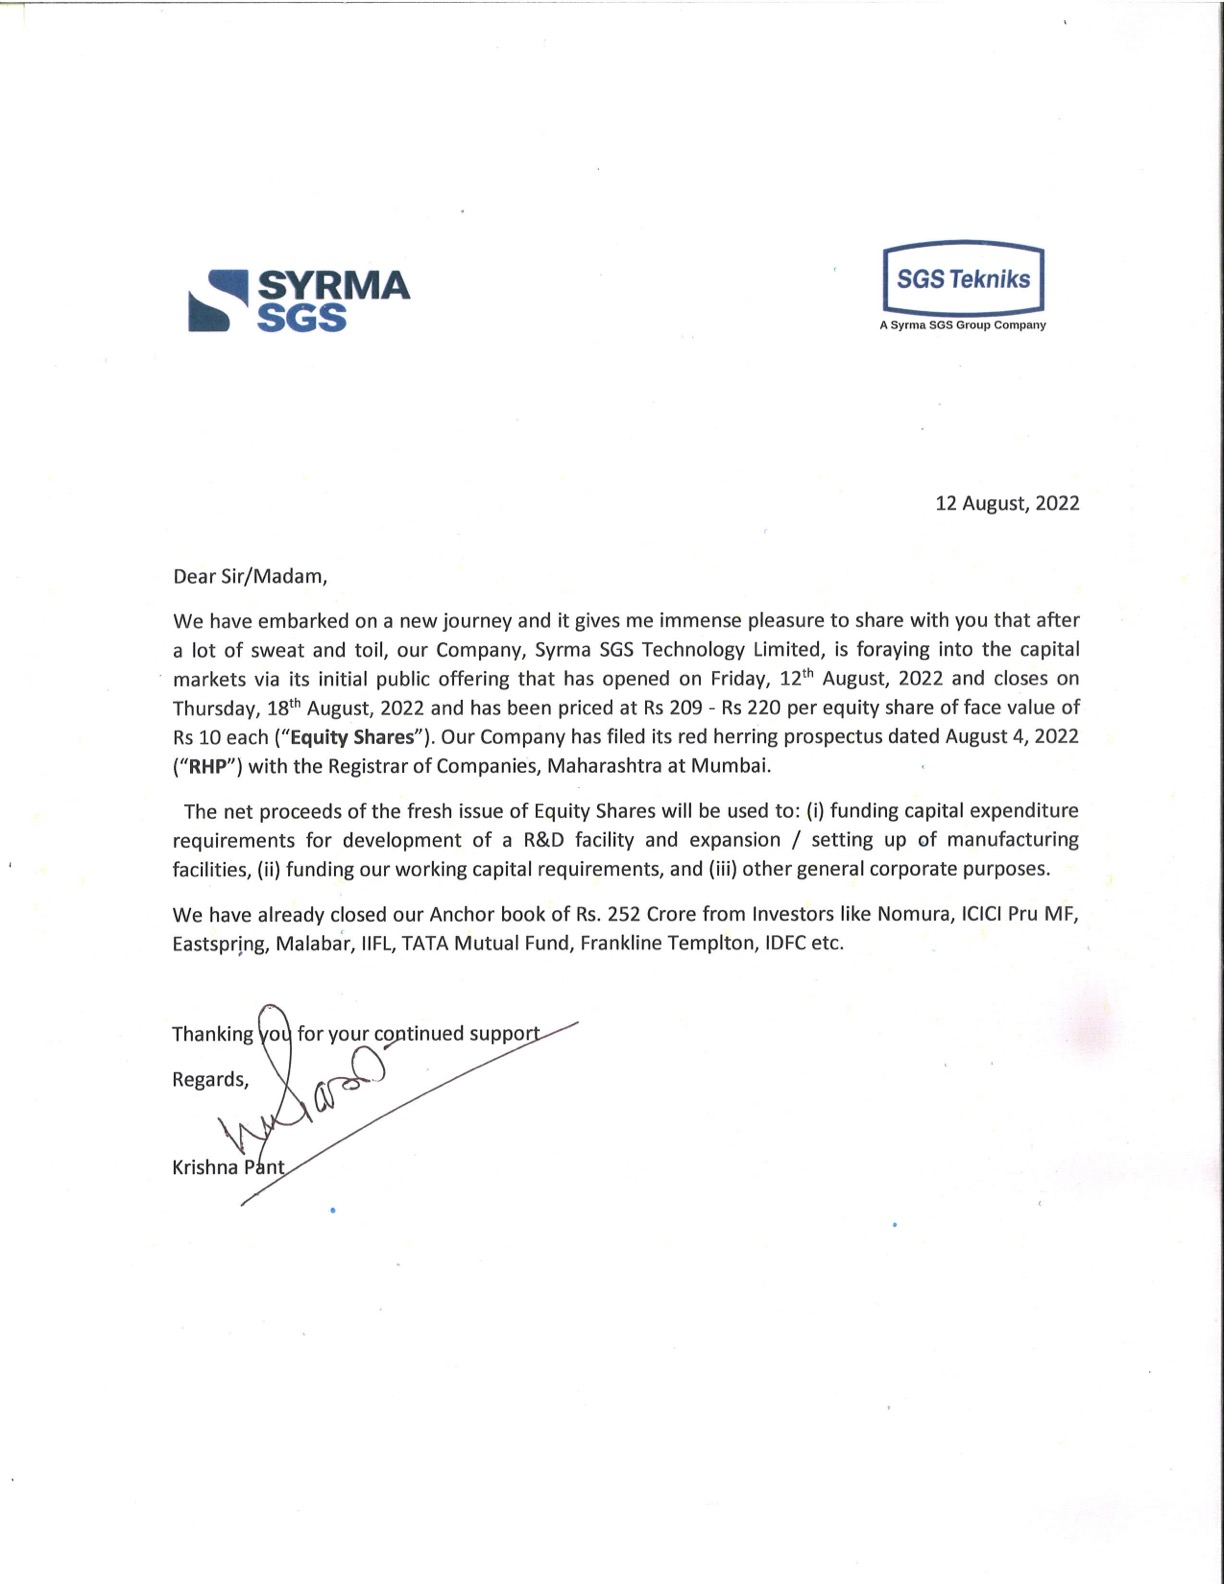 Syrma SGS IPO Letter